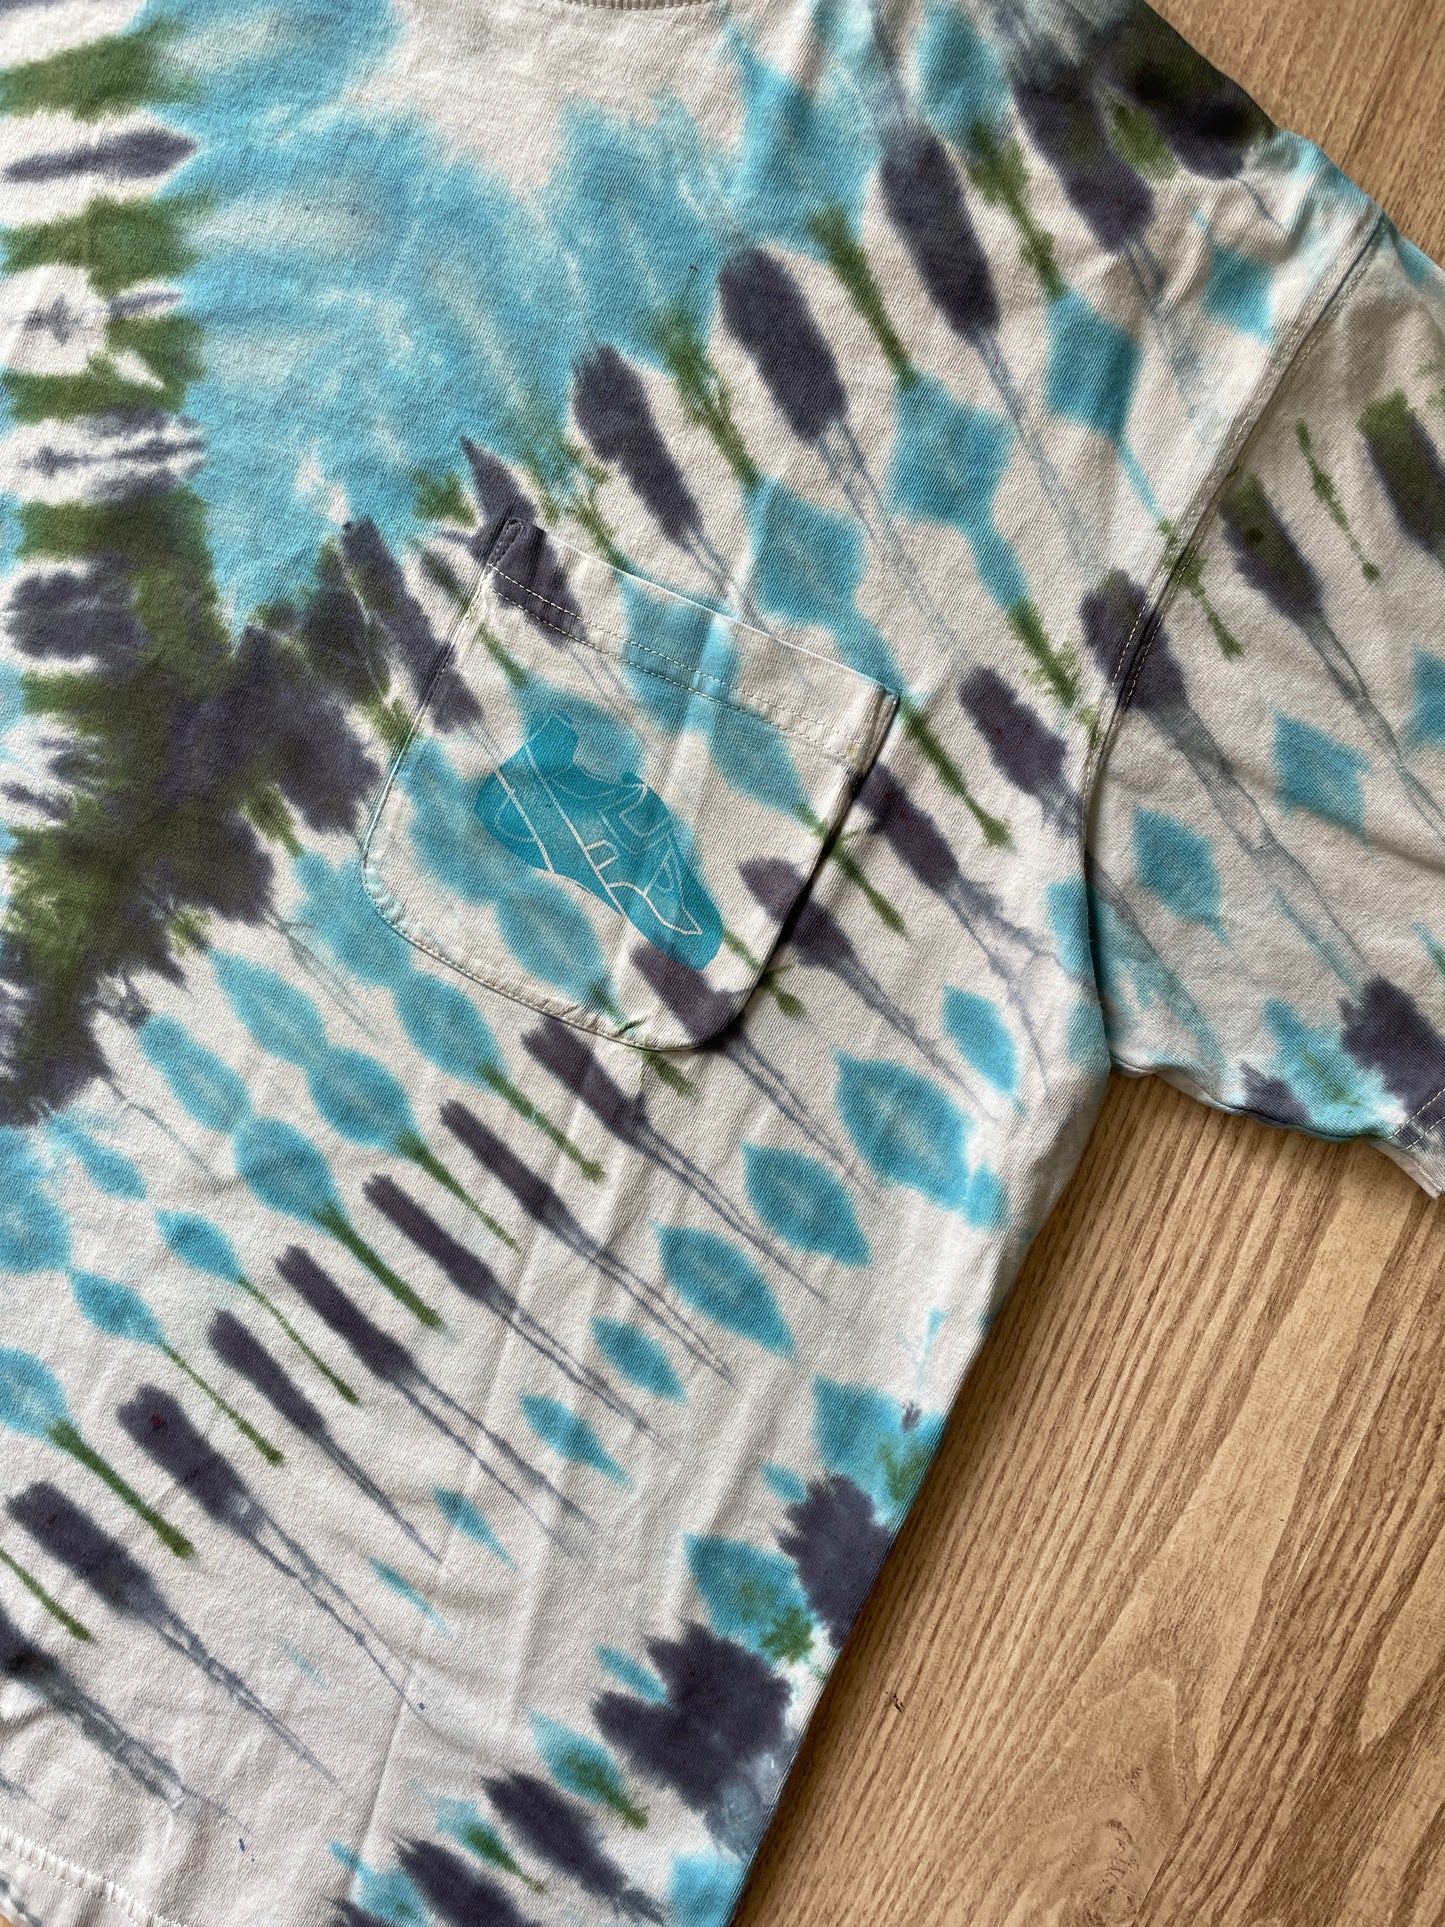 LARGE Men’s Eddie Bauer Climbing Shoe Handmade Tie Dyed T-Shirt | One-Of-a-Kind Sky Blue and Forest Green Pleated Short Sleeve